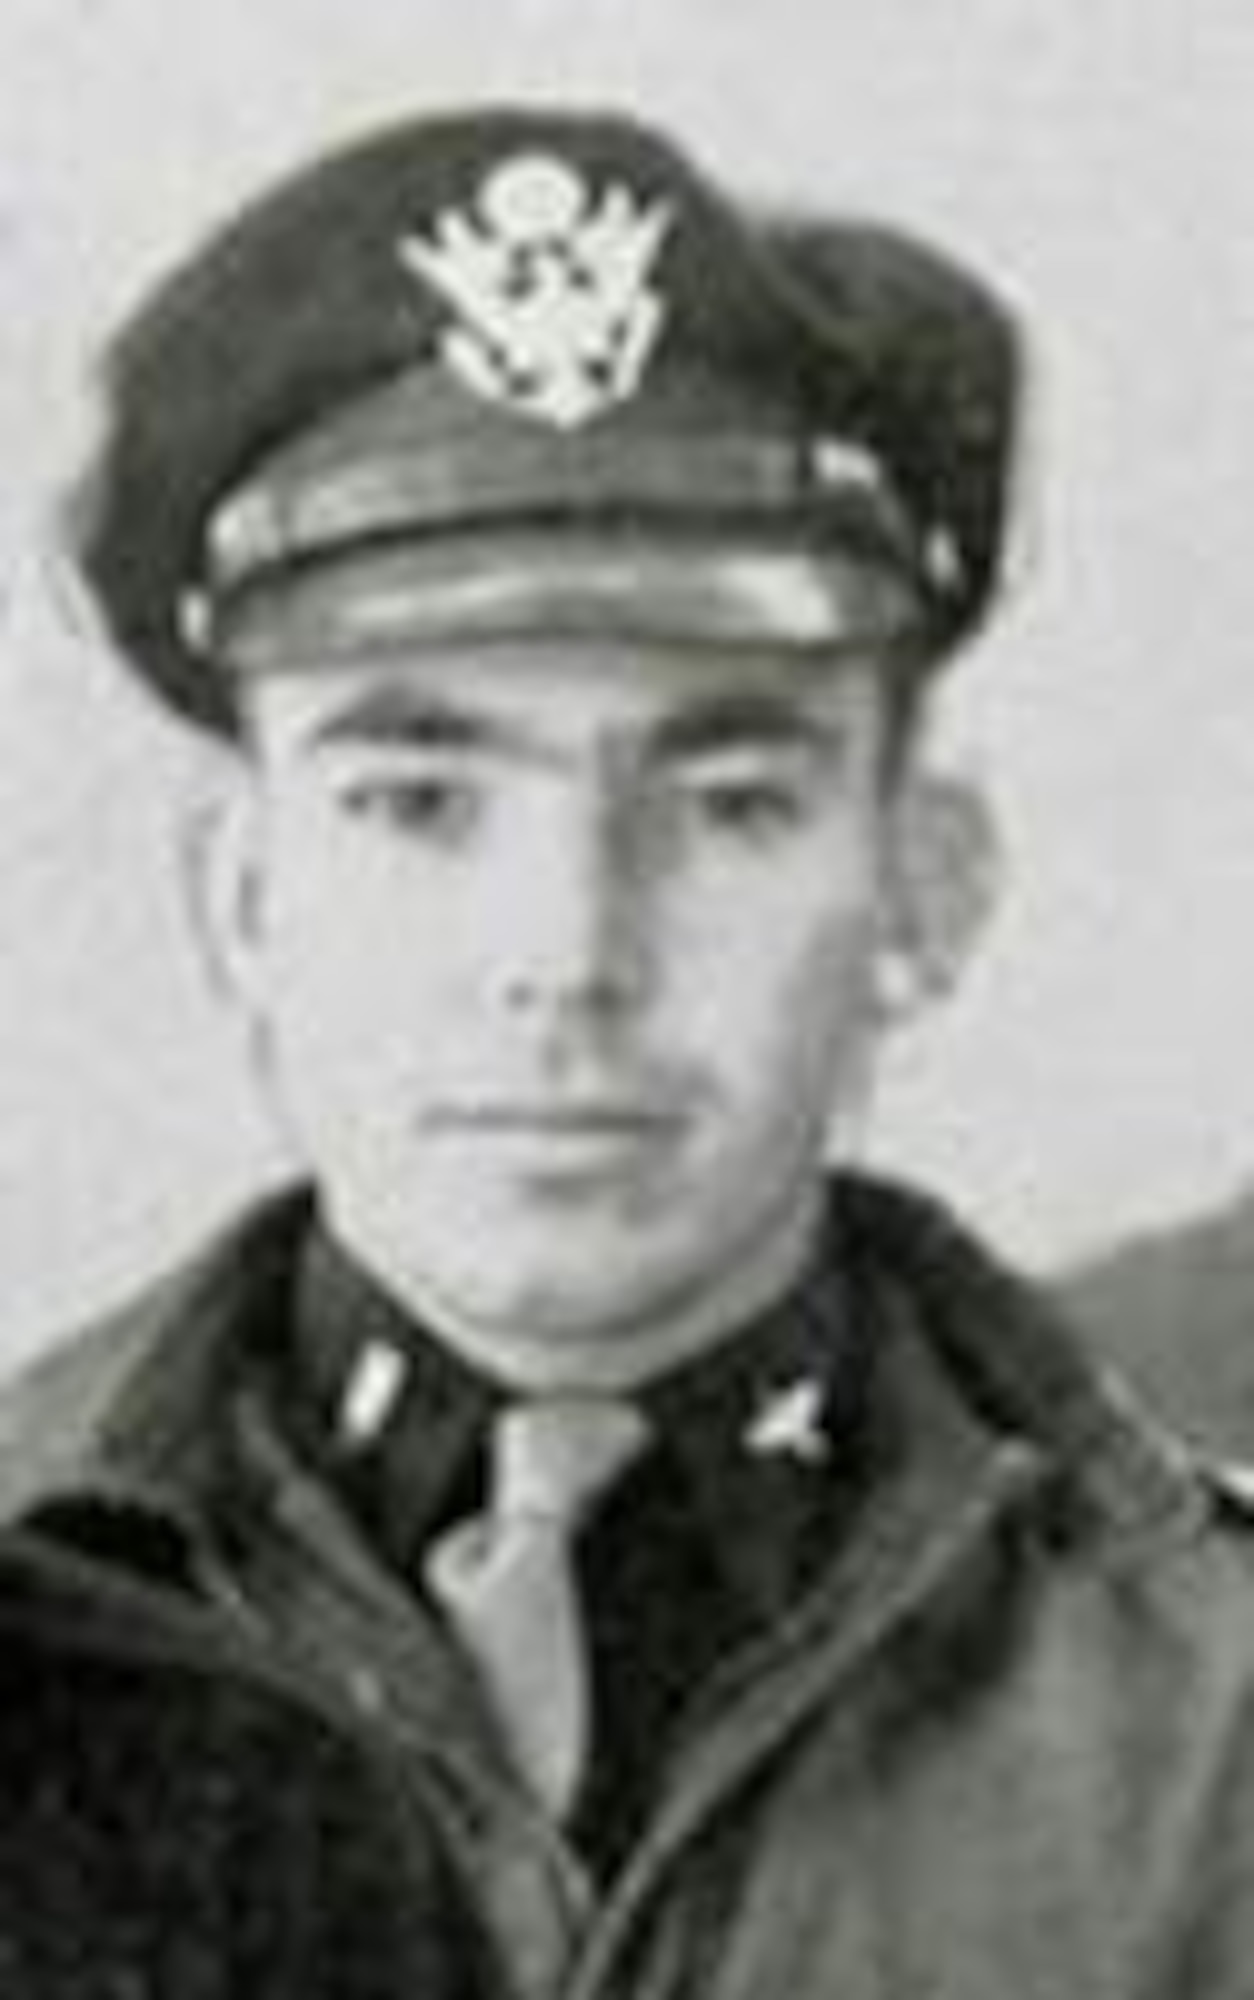 Photo of Lt. (later Capt.) Luther P. Canup of the 371st Fighter Group/405th Fighter Squadron, who completed 41 combat missions before he was shot down by German anti-aircraft fire on 8 July 1944 over France. He was taken prisoner and spent the rest of the war in various POW camps. (The Story of the 371st Fighter Group in the E.T.O.)